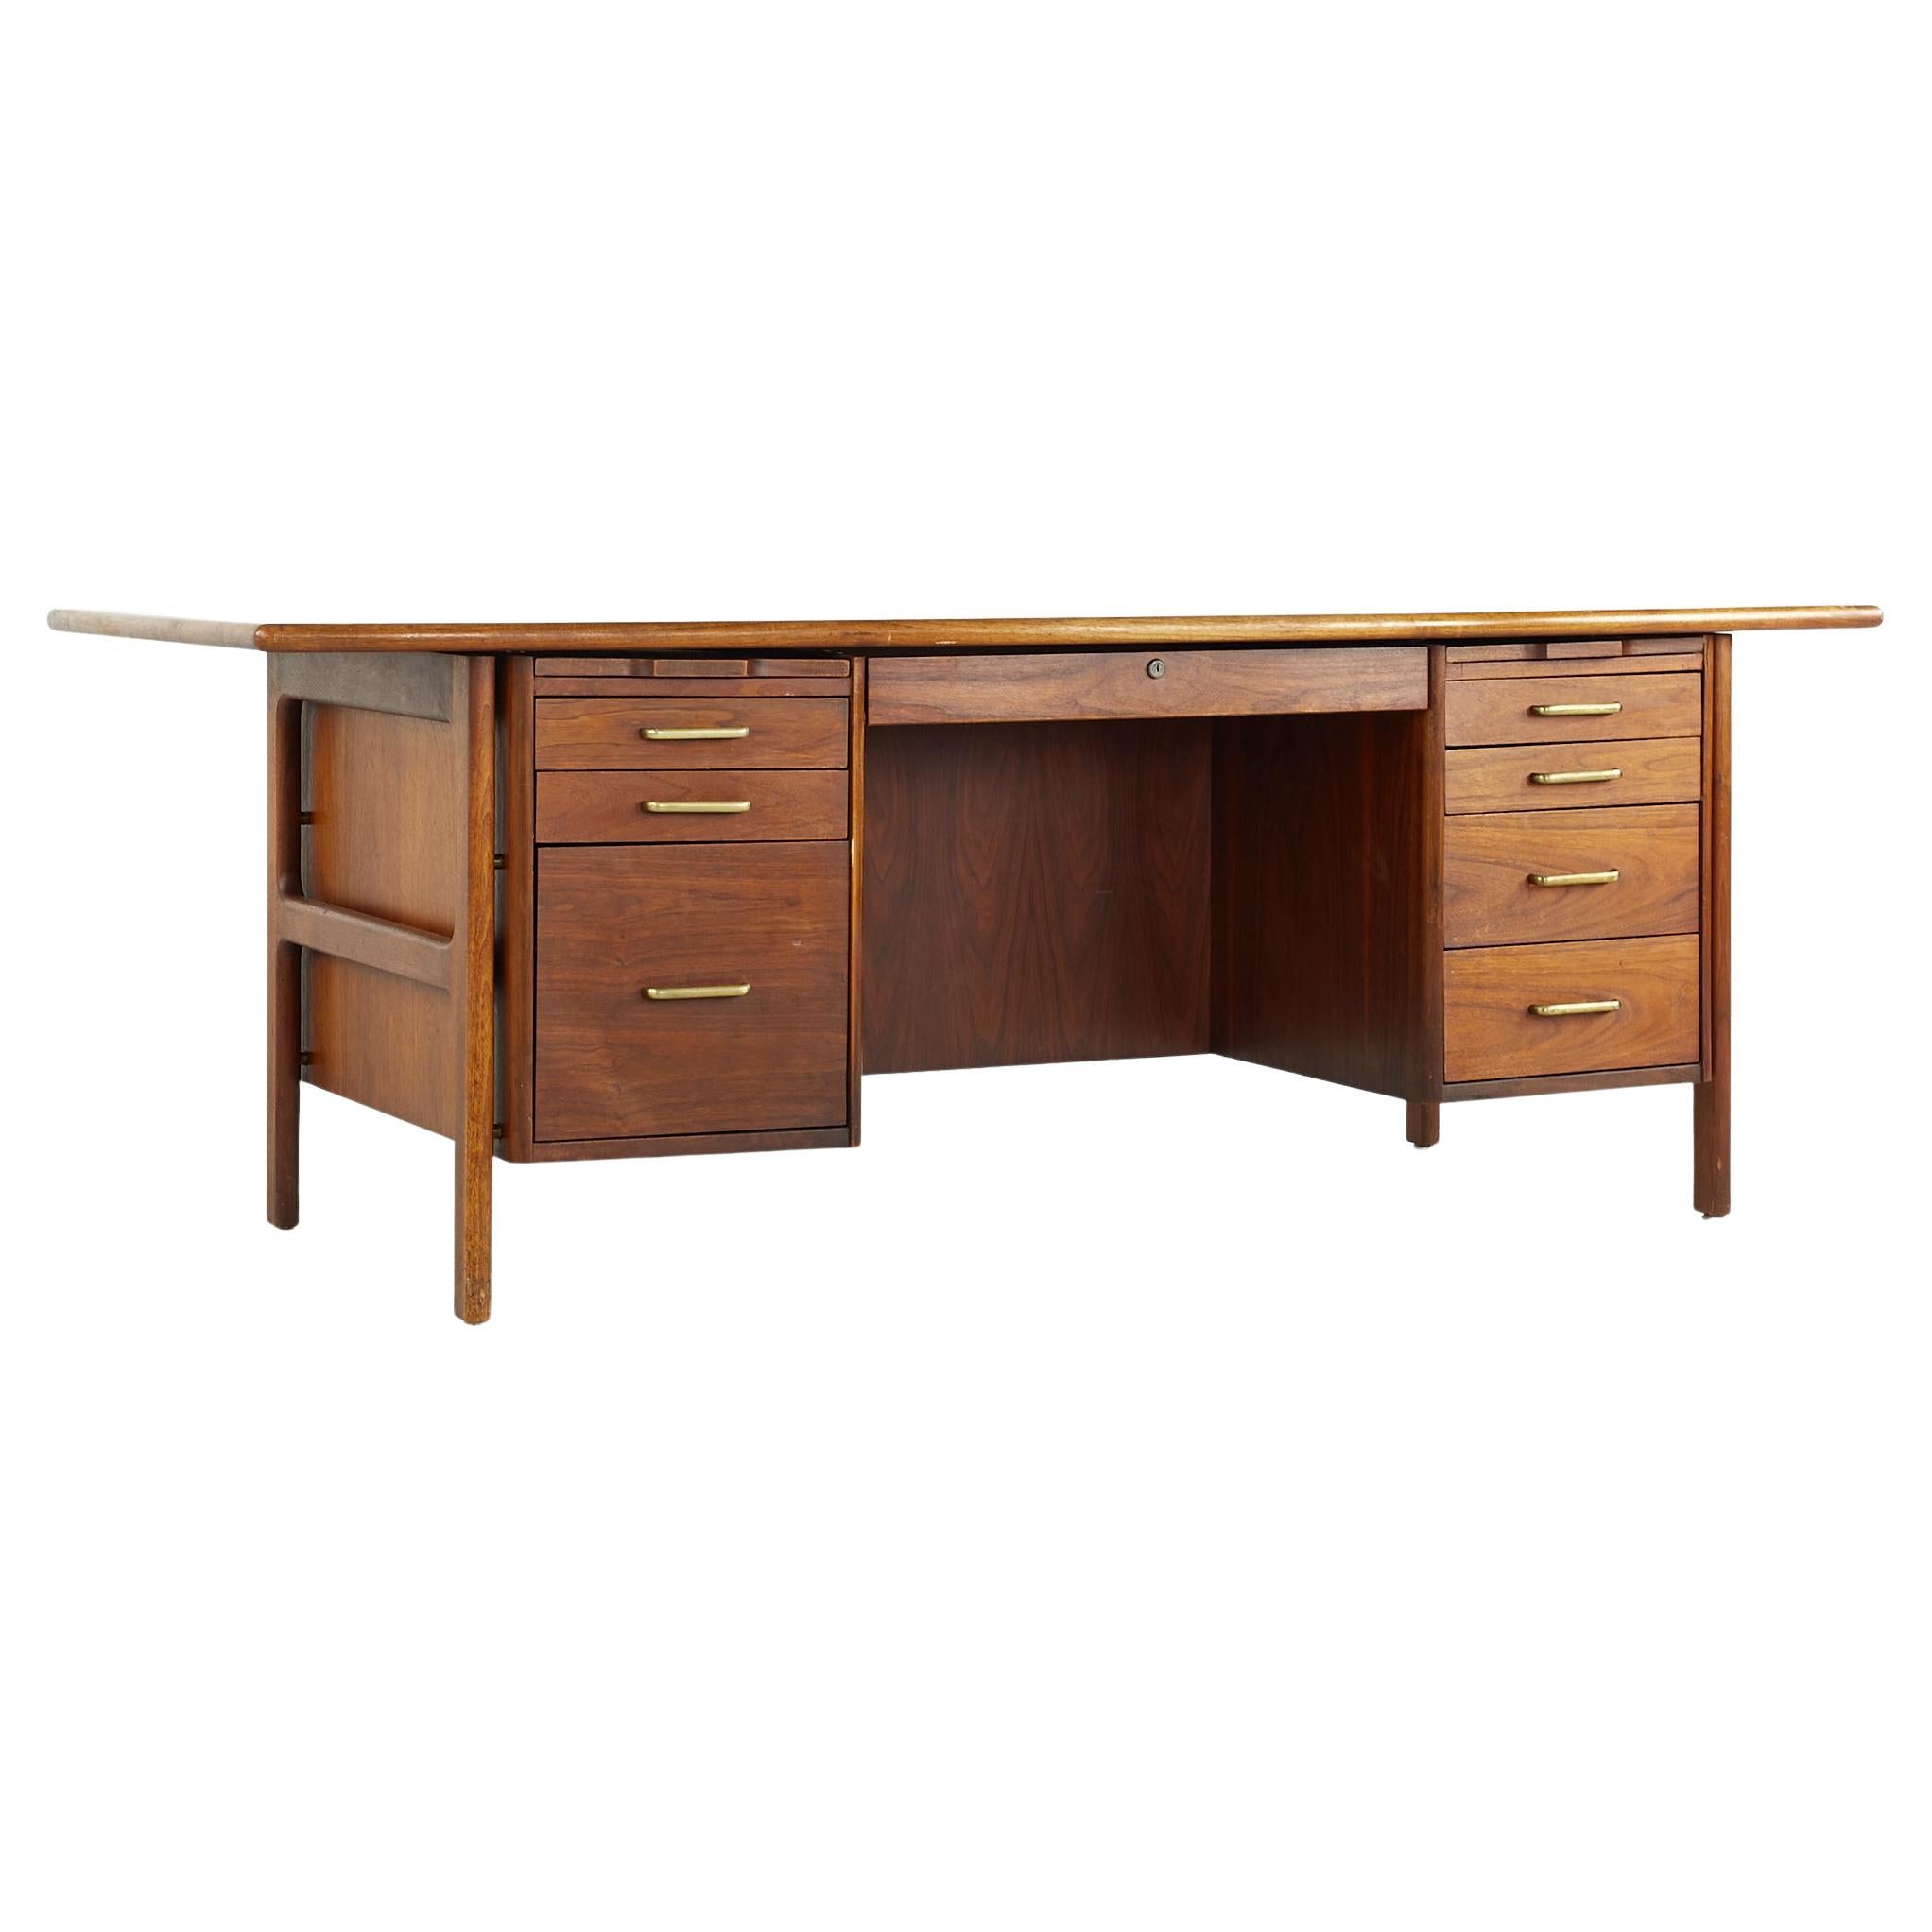 SOLD 01/09/24 Standard Midcentury Walnut and Cane Executive Desk